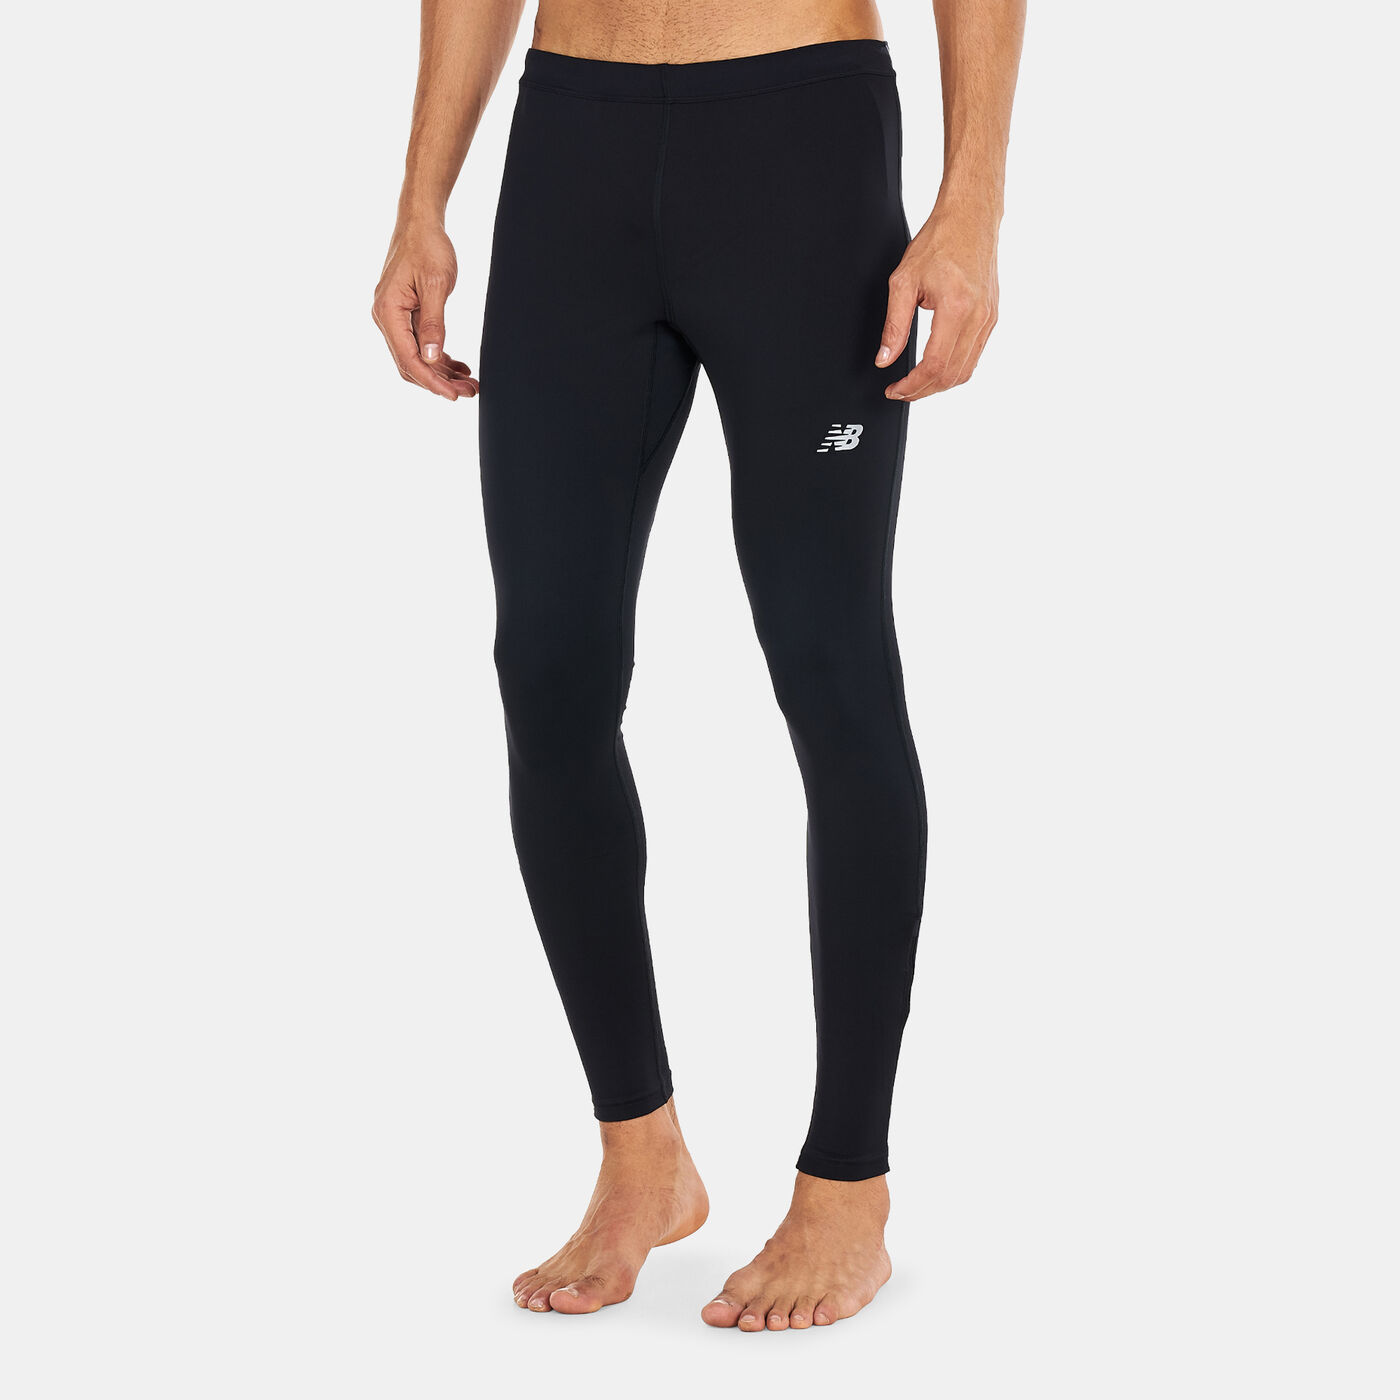 Men's Accelerate Tights